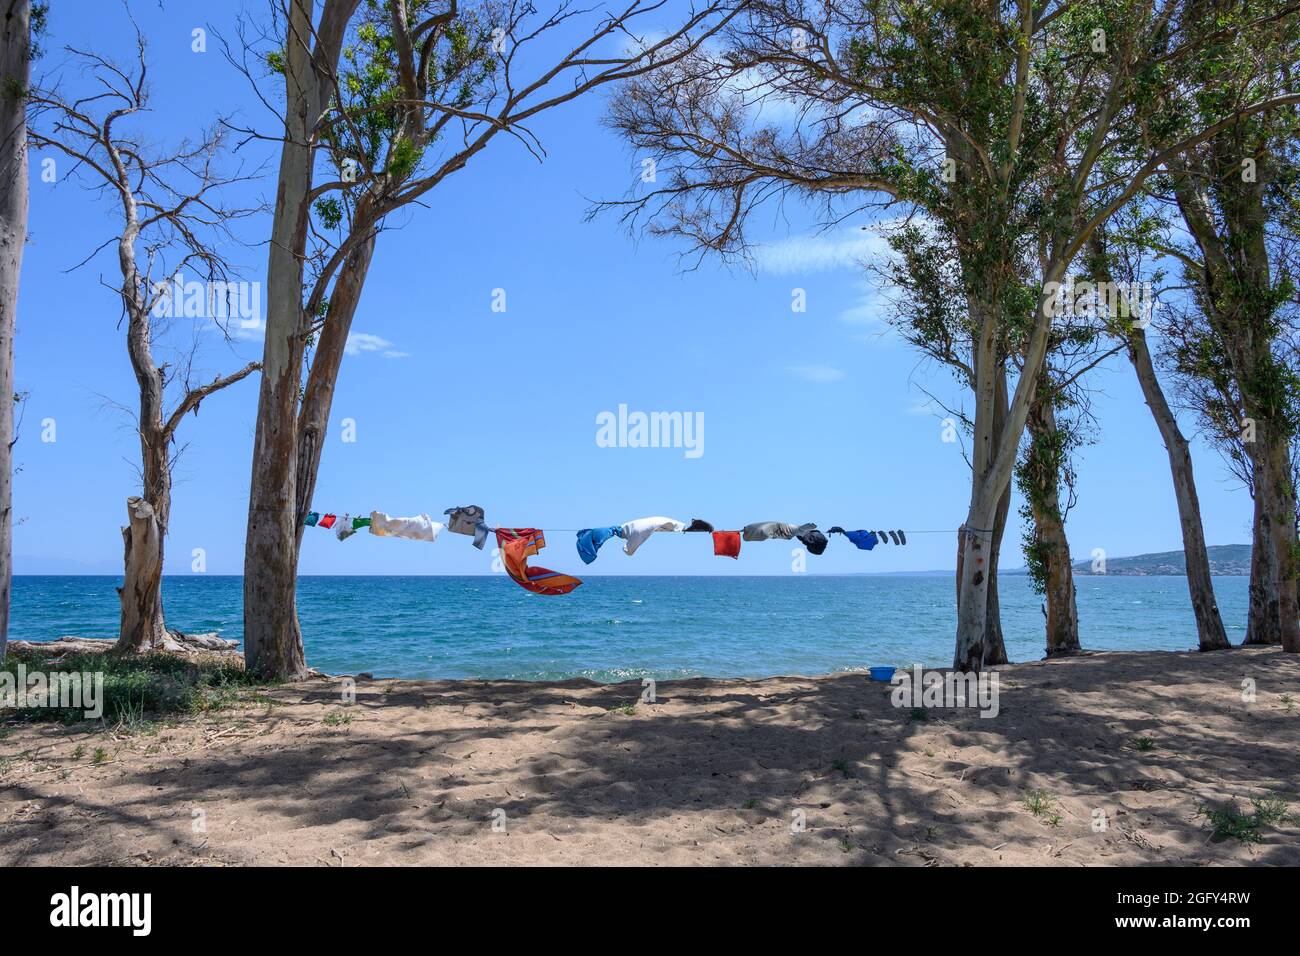 Campers clothes drying on a washing line, strung between trees, next to the sea on a beach in Southern Greece. Stock Photo